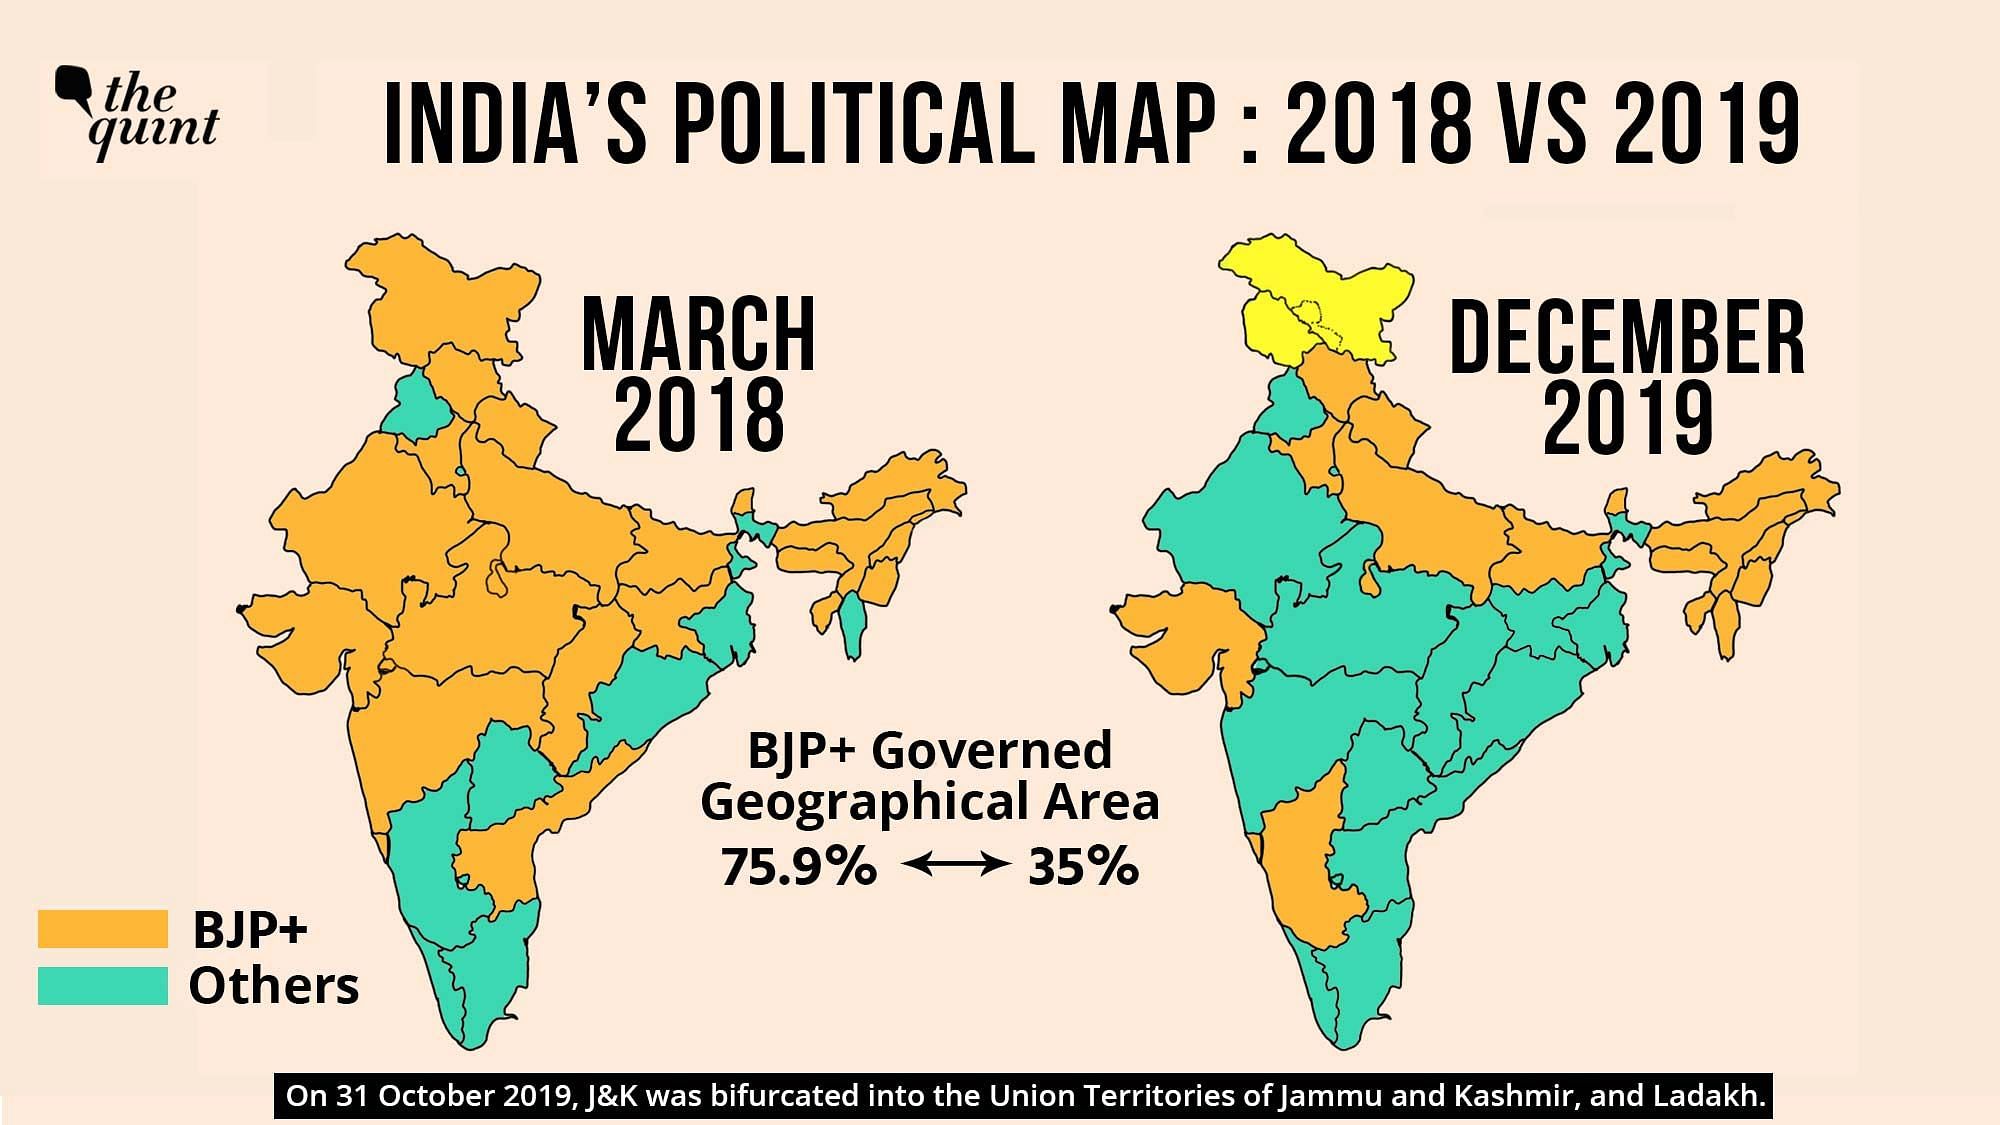 The BJP now rules in only 35 percent of India, as compared to its 75 percent share in March 2018 (area-wise).